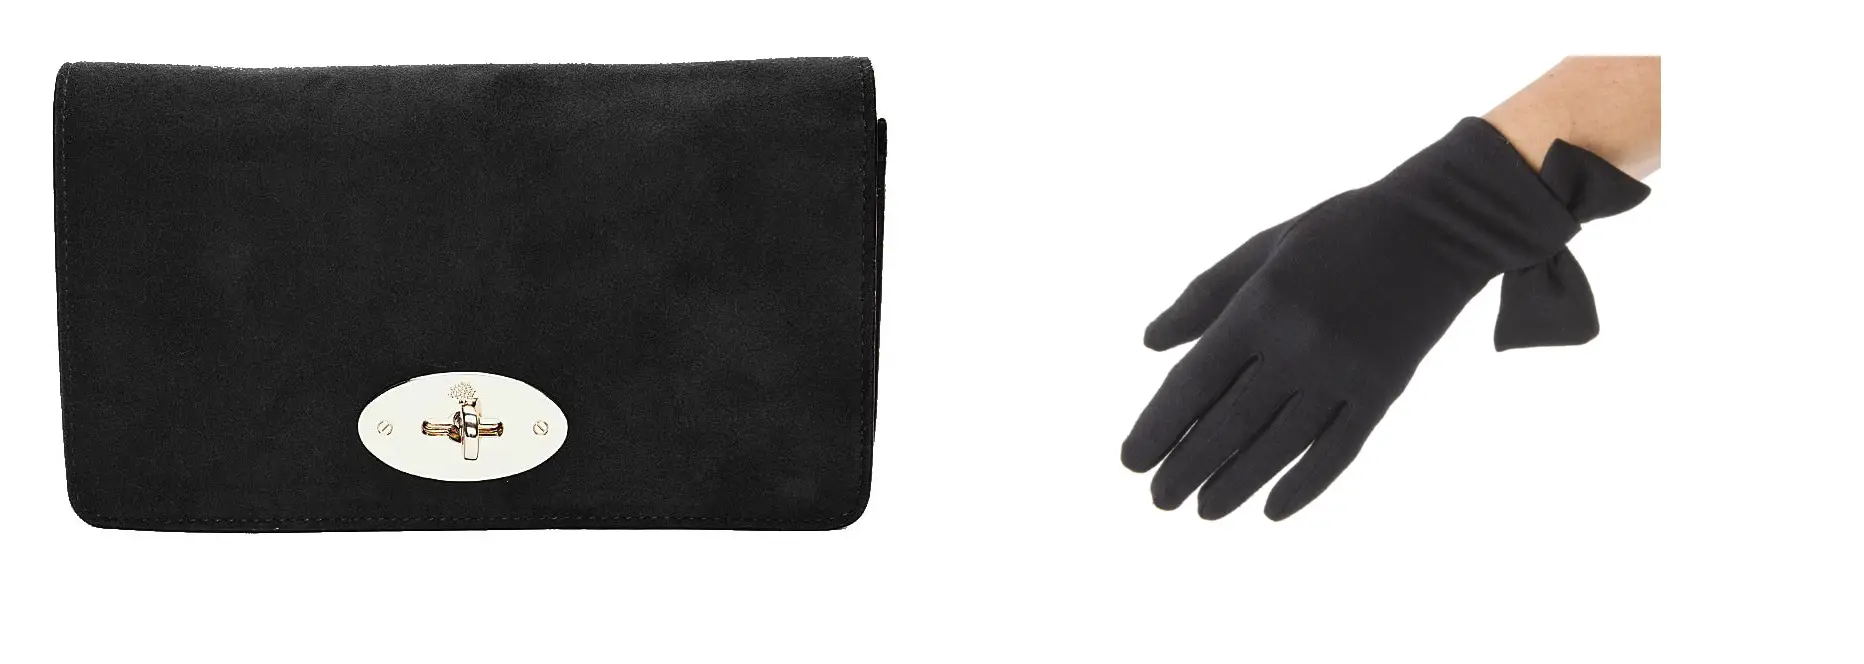 Mulberry Bayswater Clutch and Cornelia James Beatrice gloves